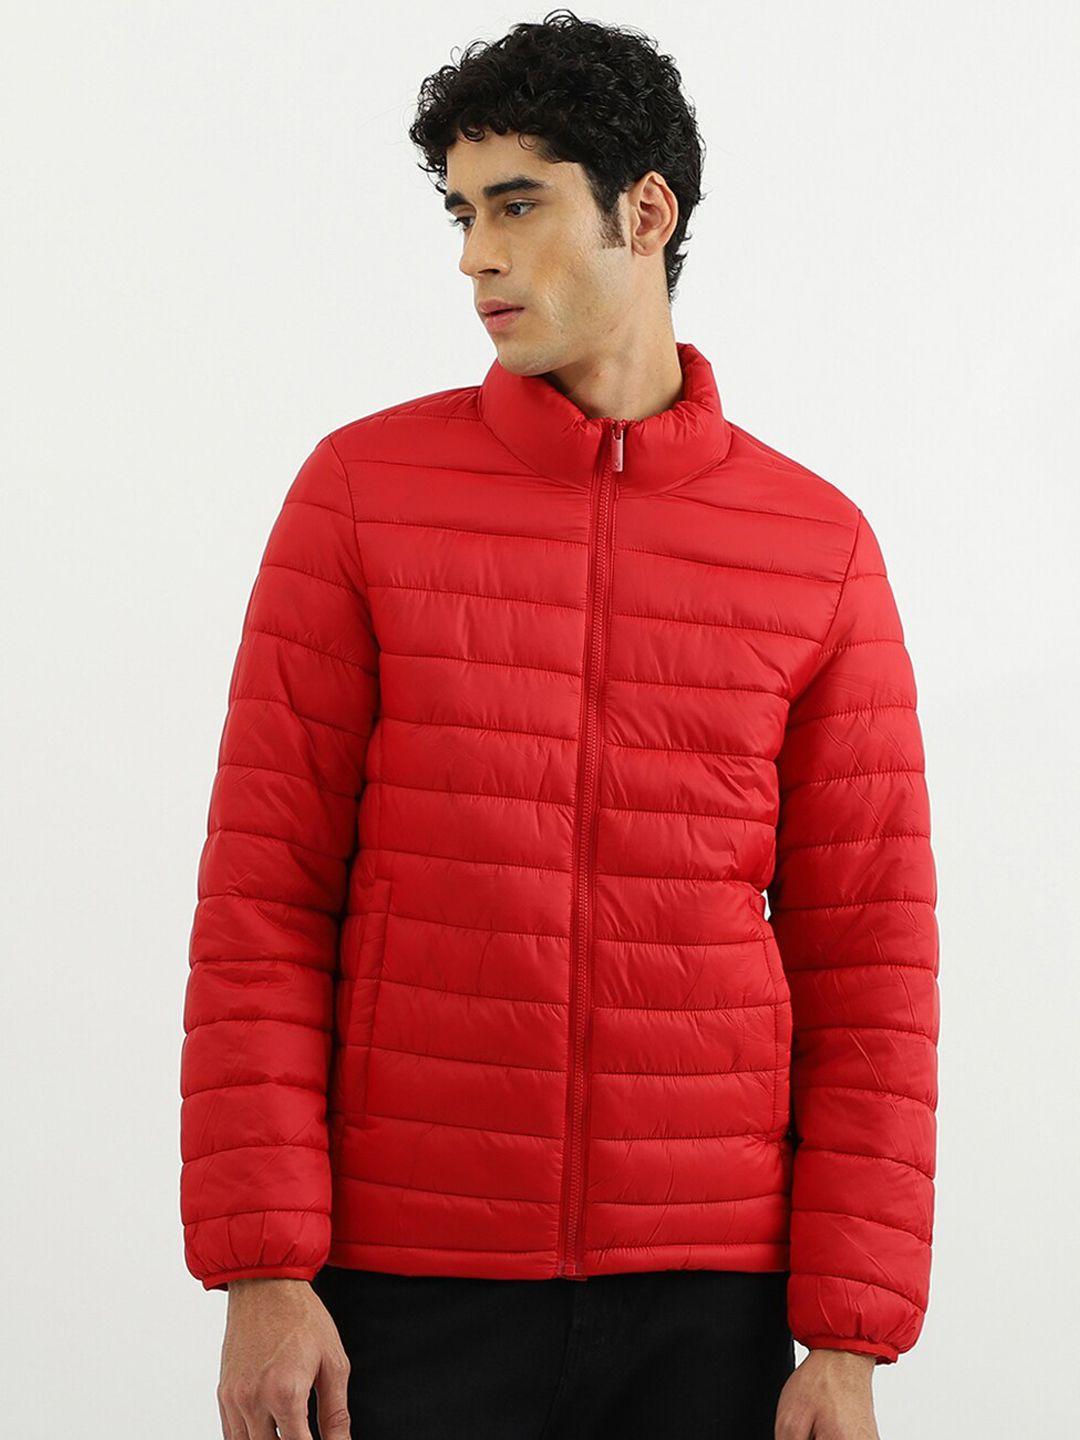 united-colors-of-benetton-men-red-puffer-jacket